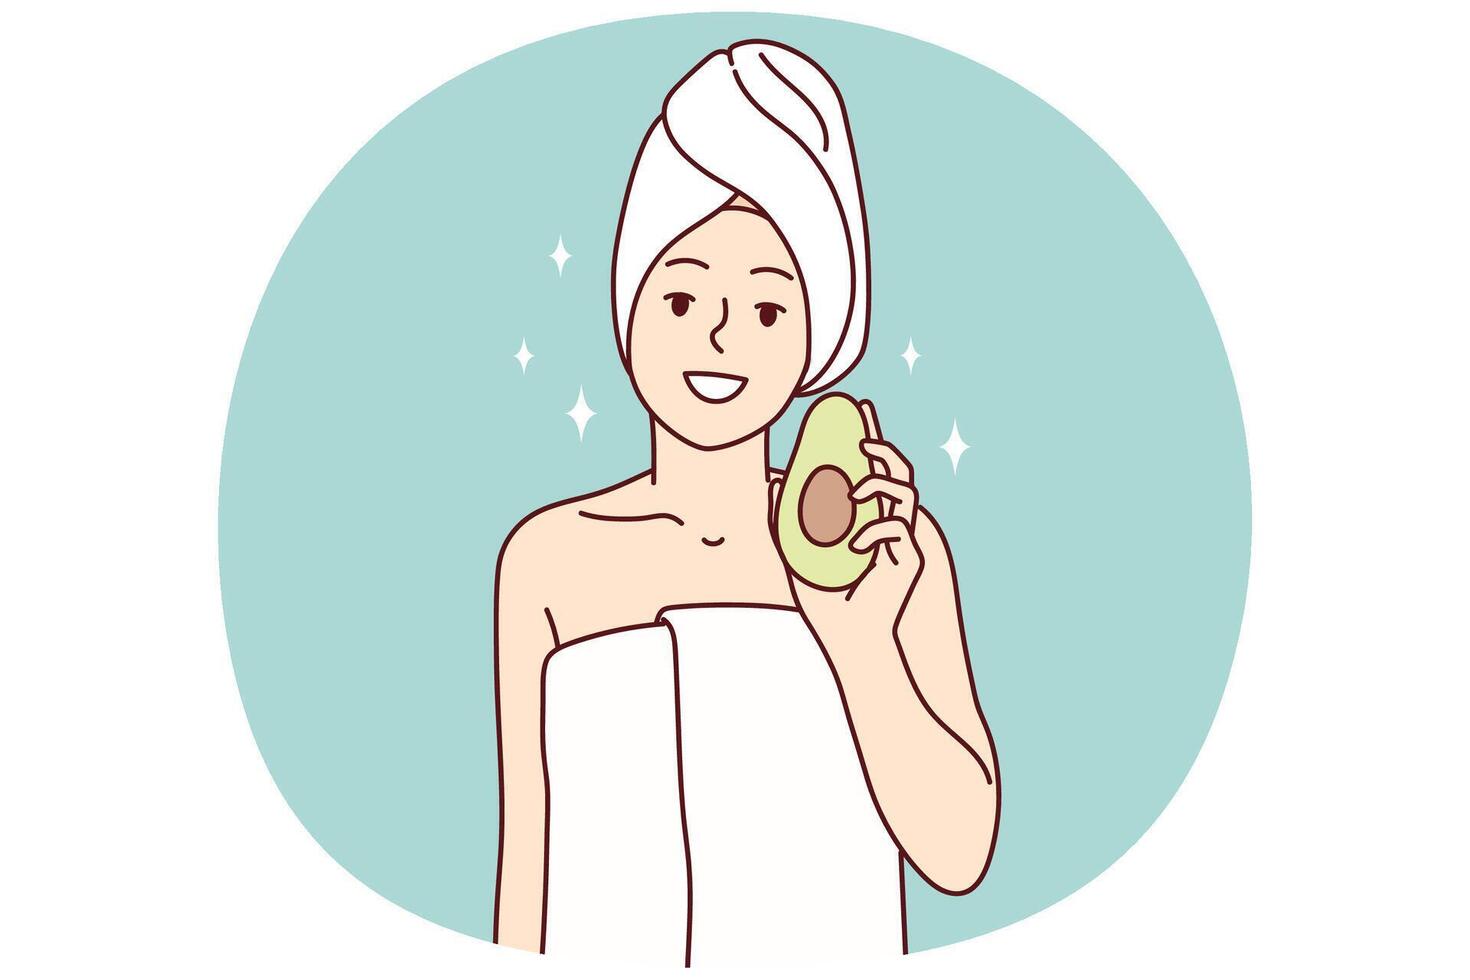 Woman in white towel after getting out SPA recommends using avocado for cosmetic masks. Vector image